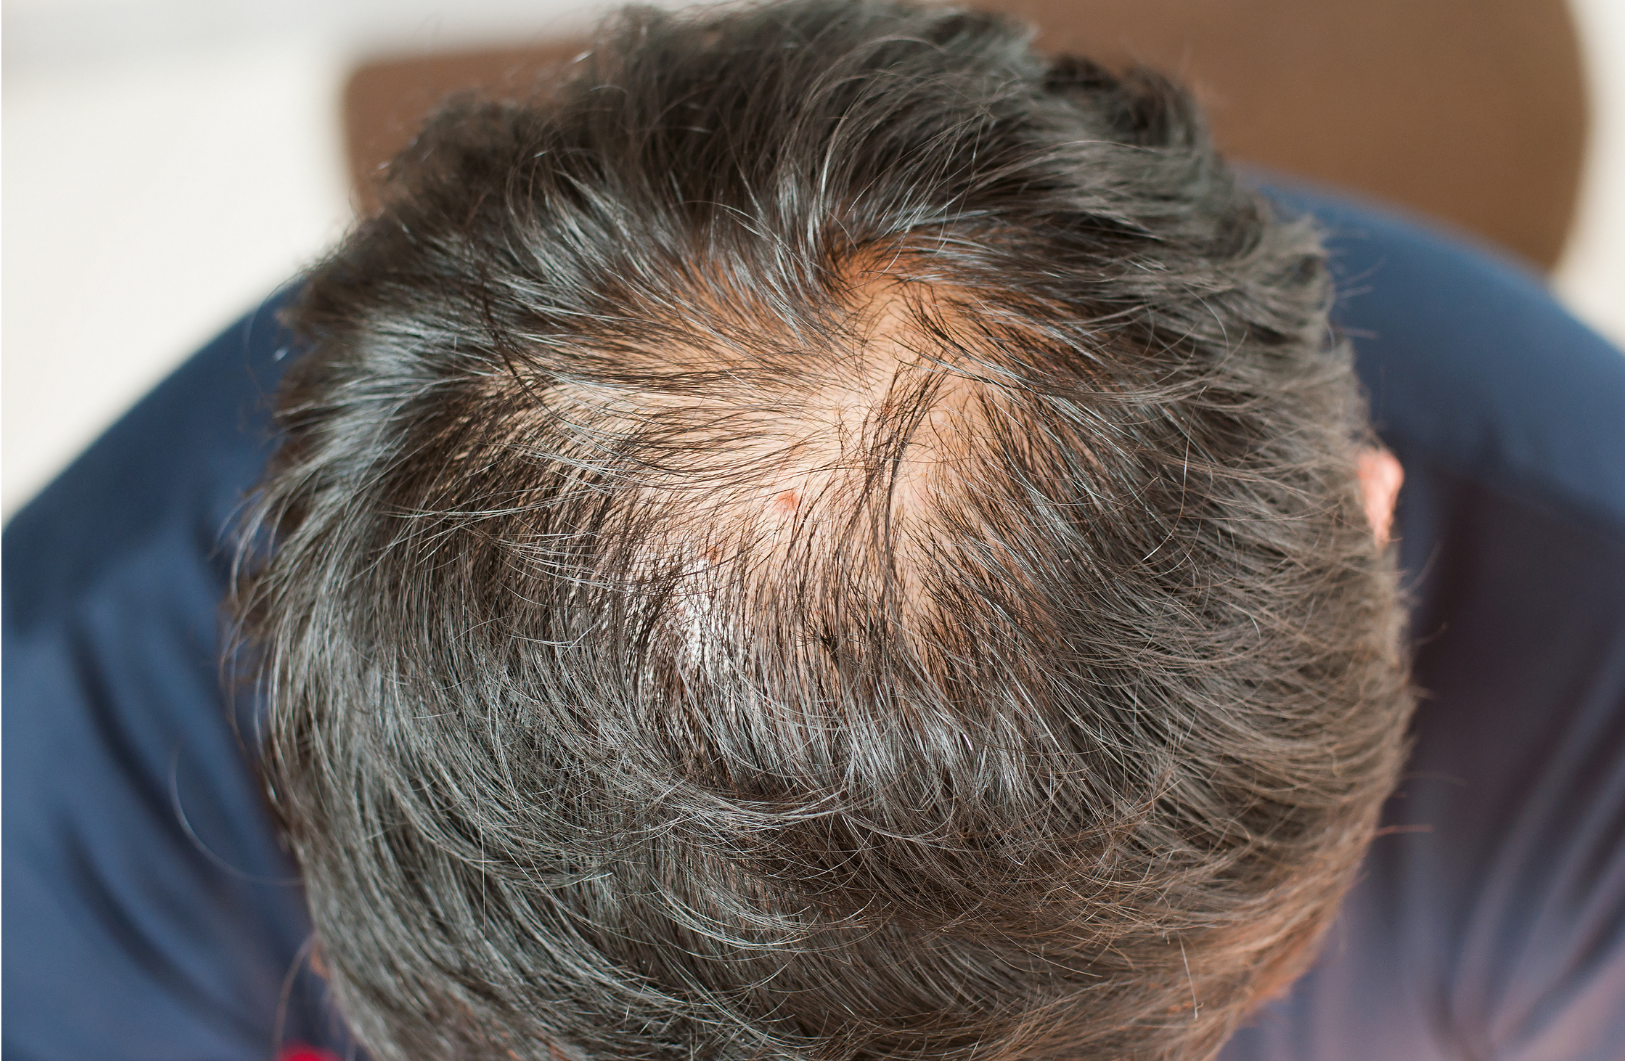 Scalp Acne Treatment in Singapore - Treating Scalp Acne Quickly and  Effectively